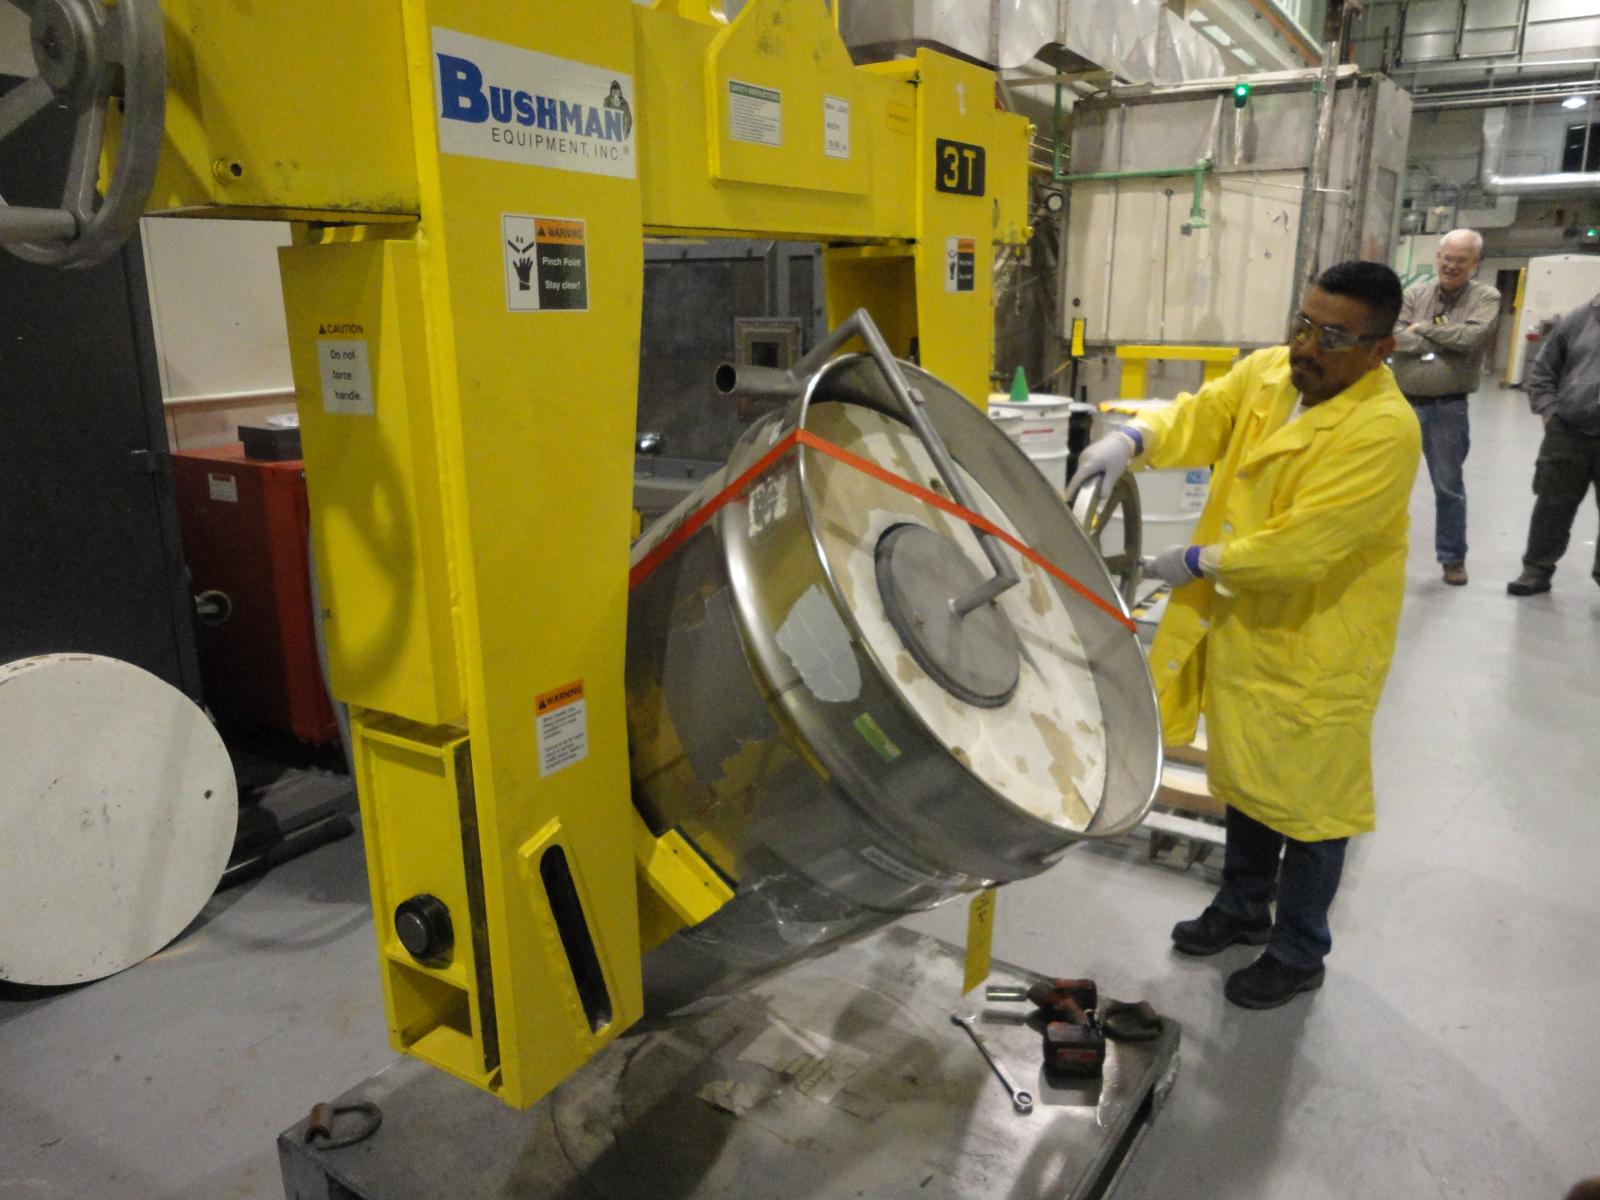 A man in a yellow lab coat uses equipiment to rotate a large metal drum